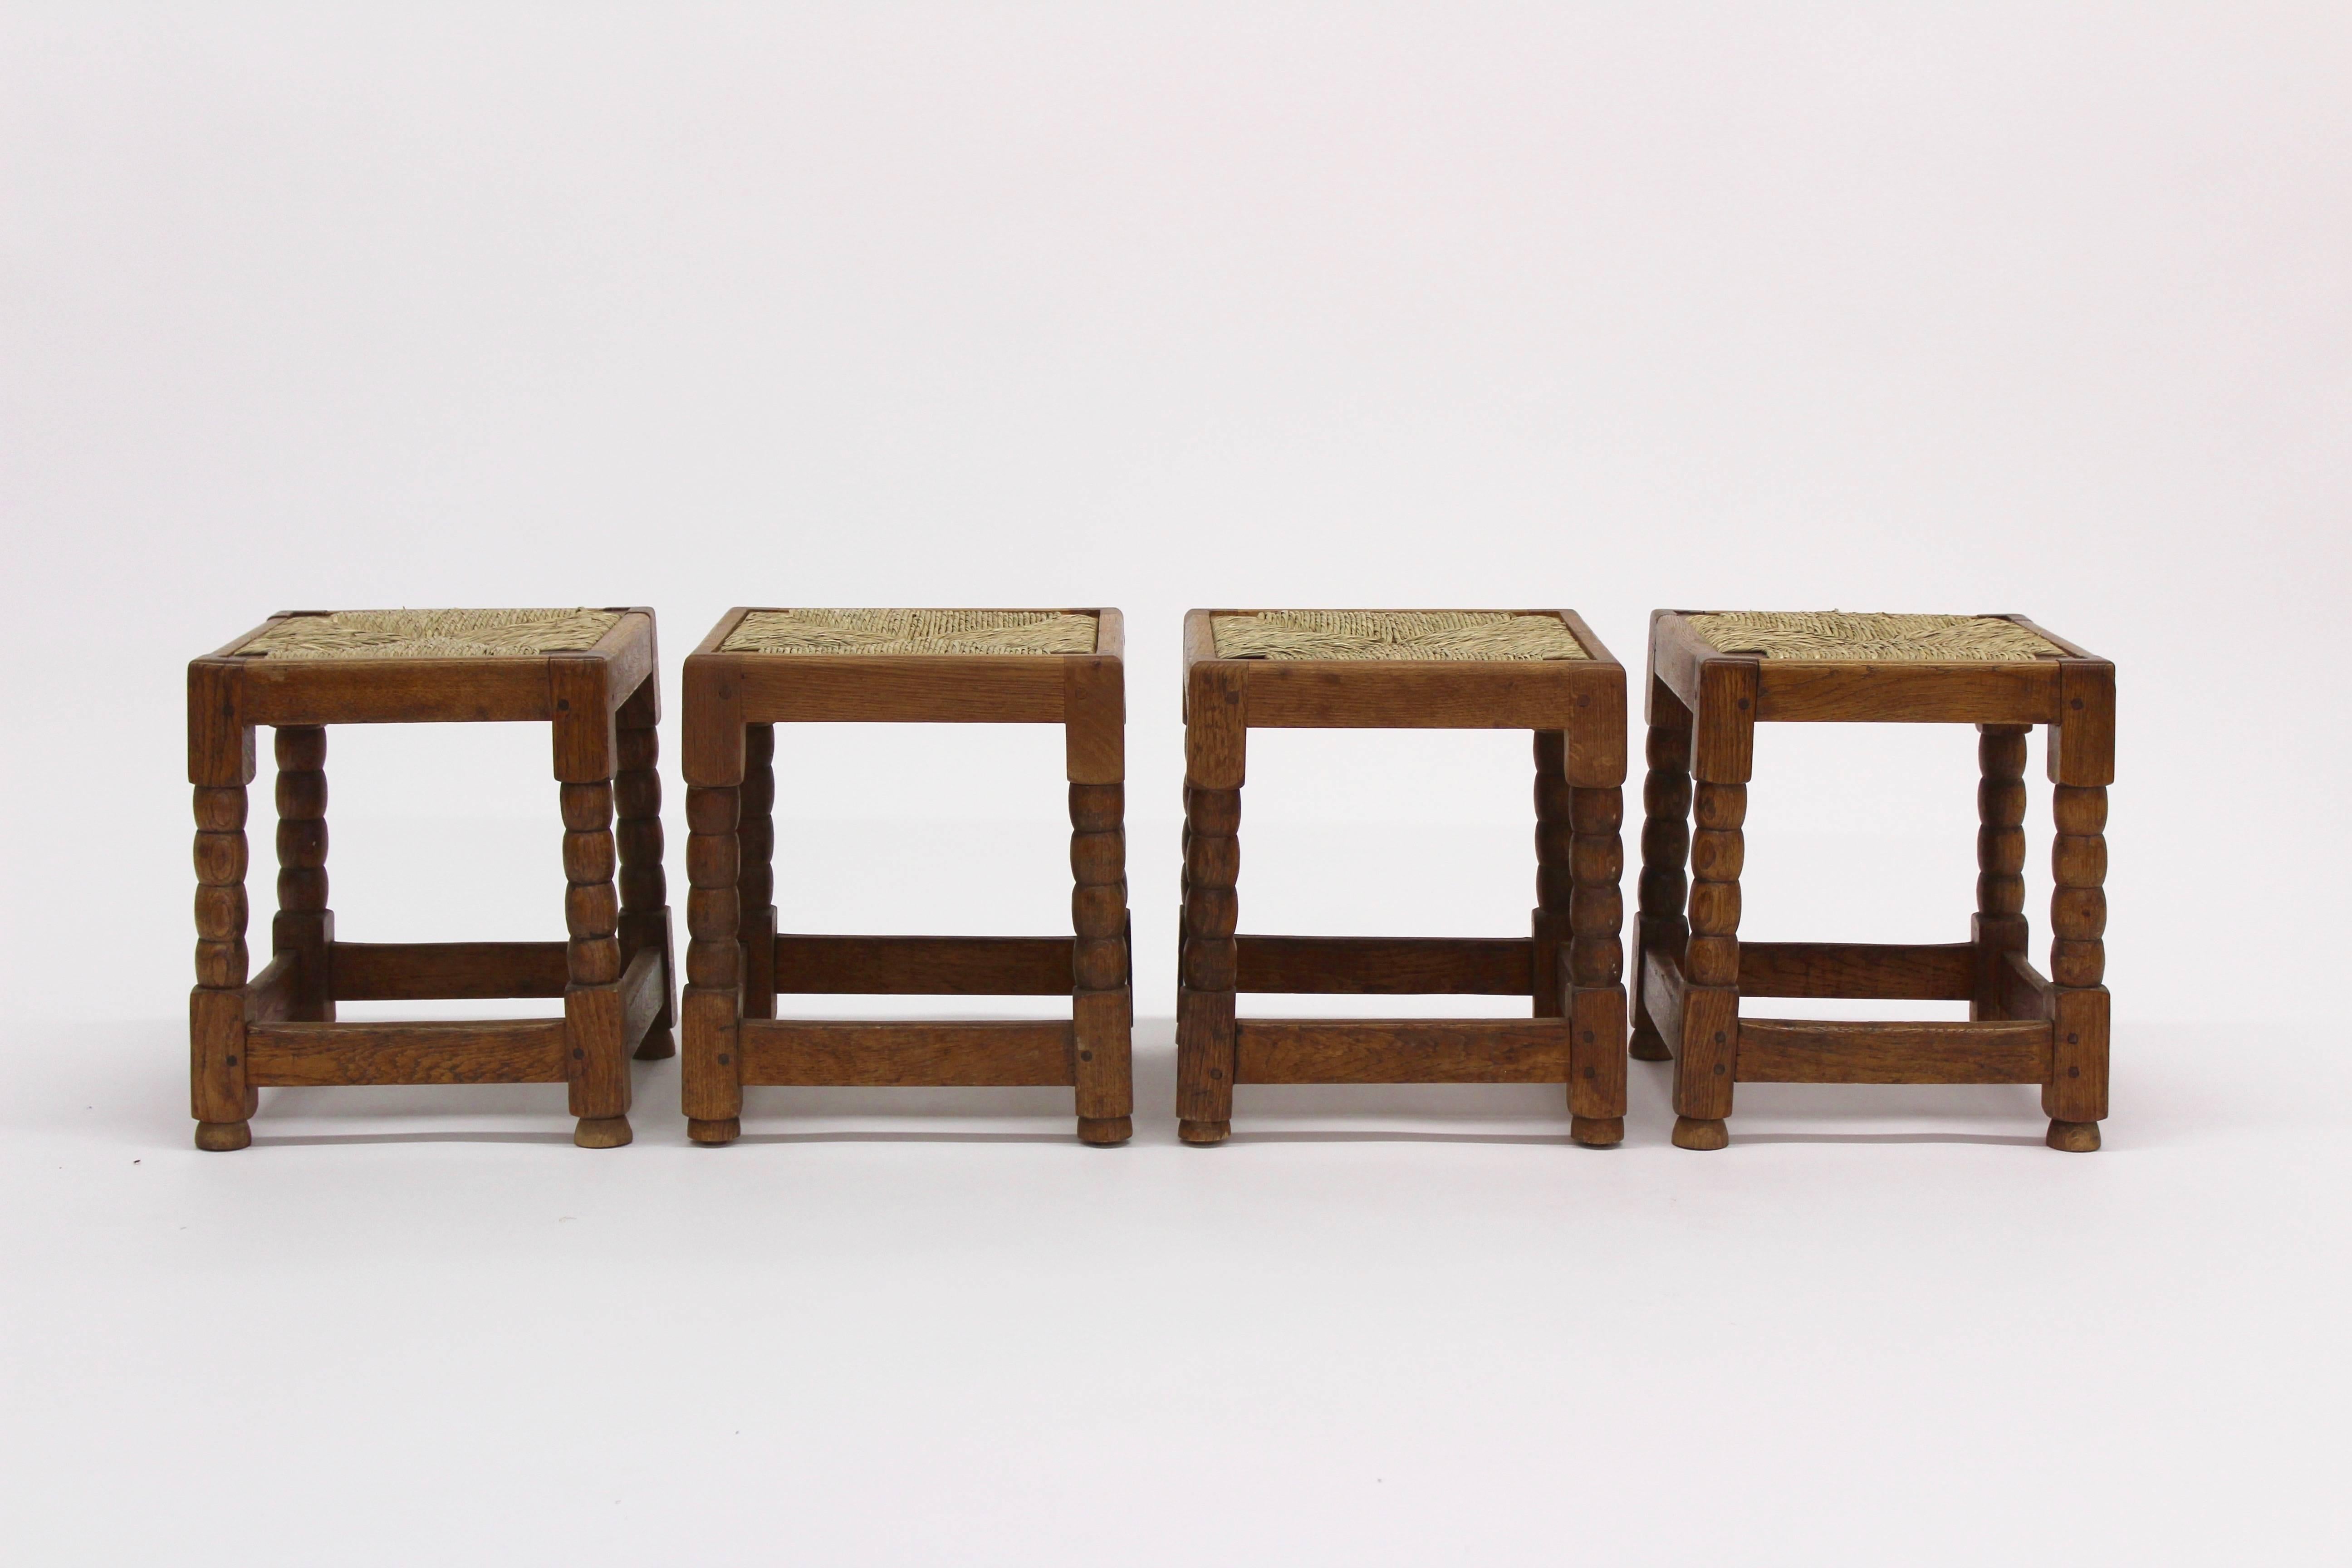 Two charming, versatile wood and rush stools from England, circa 1910/Arts & Crafts. Perfect for a seating perch, extra table surface or foot stool.

 